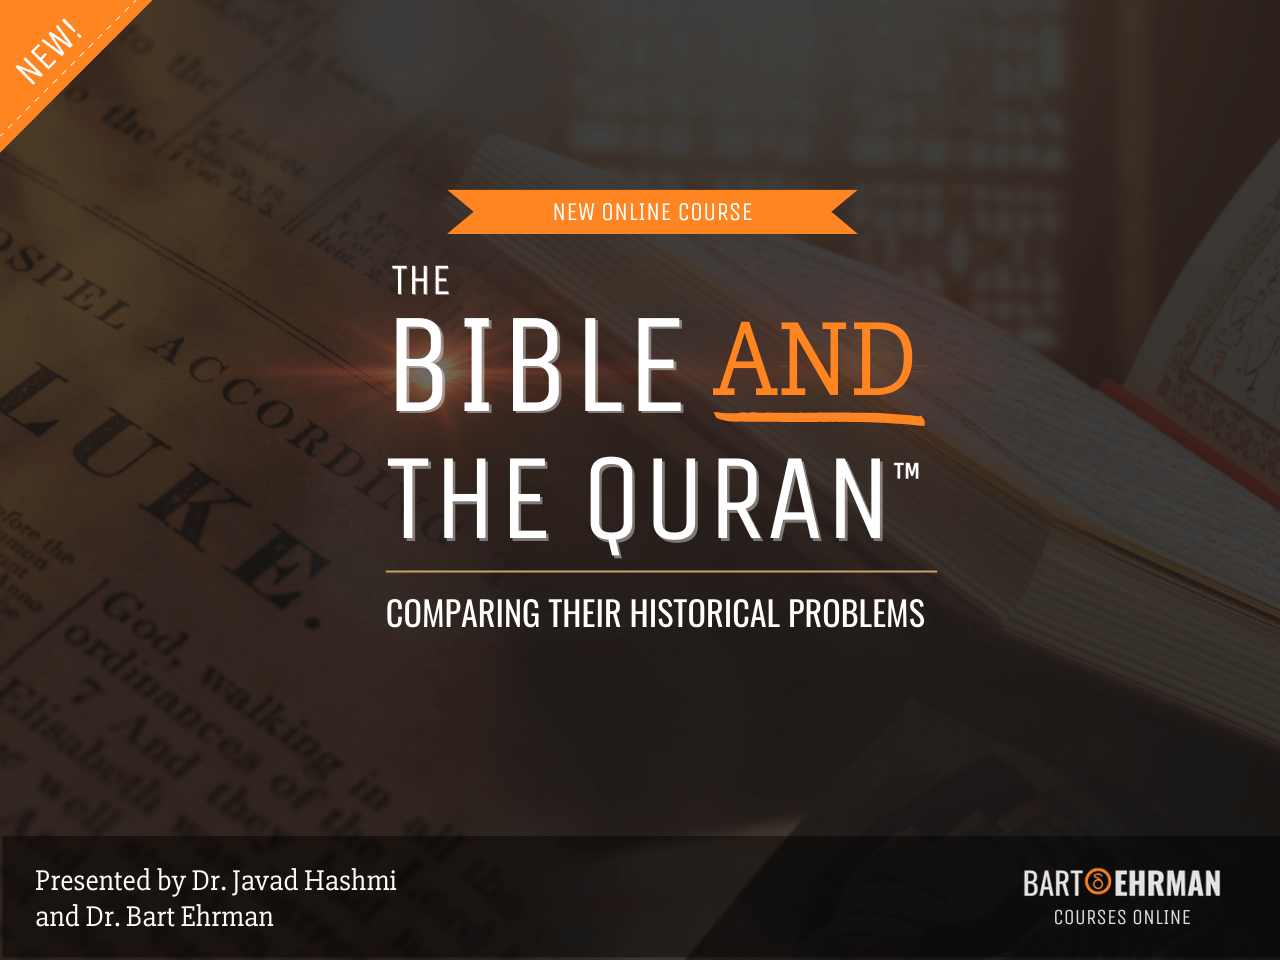 The Bible and the Quran Online Course